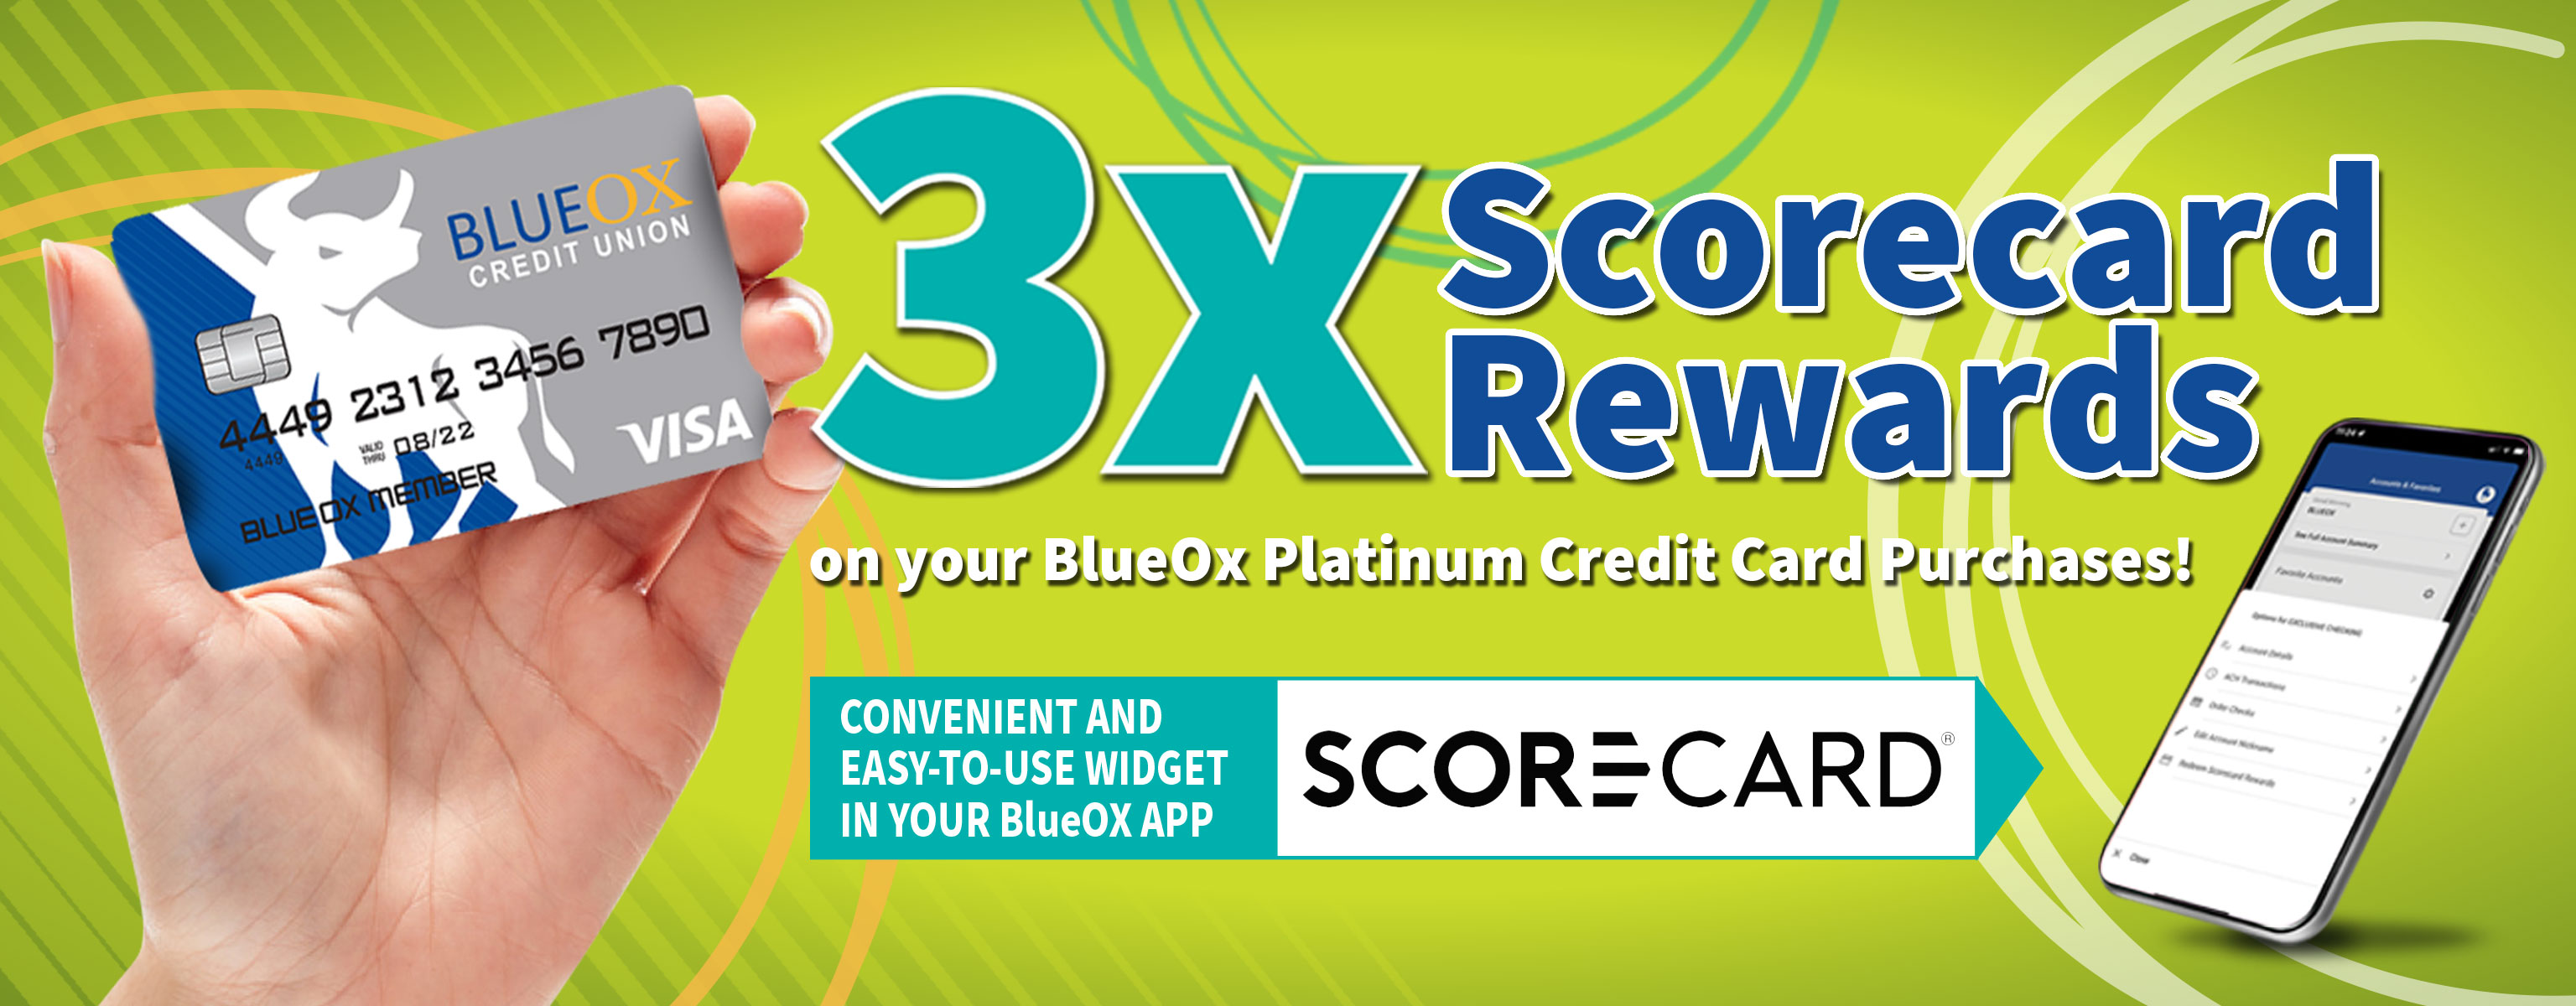 For a Limited Time, Earn 3x the Scorecard rewards on your BlueOx Credit Union Platinum Credit Card Purchases.